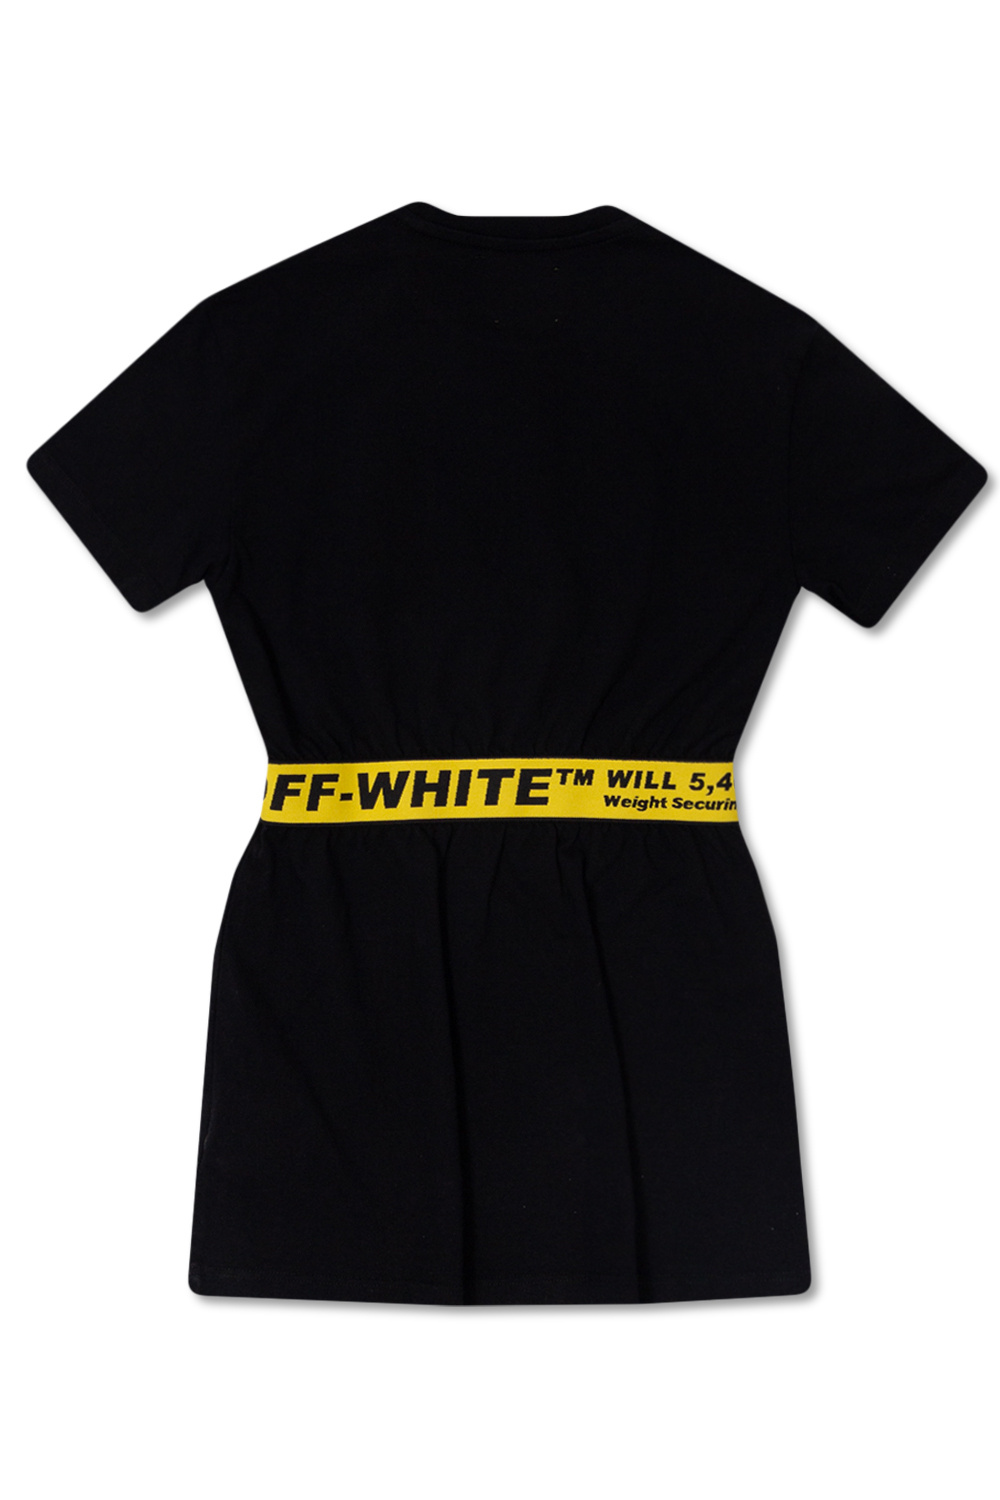 Off-White Kids Head outside and back into your habits wearing the ® Back In Hybrid Rights